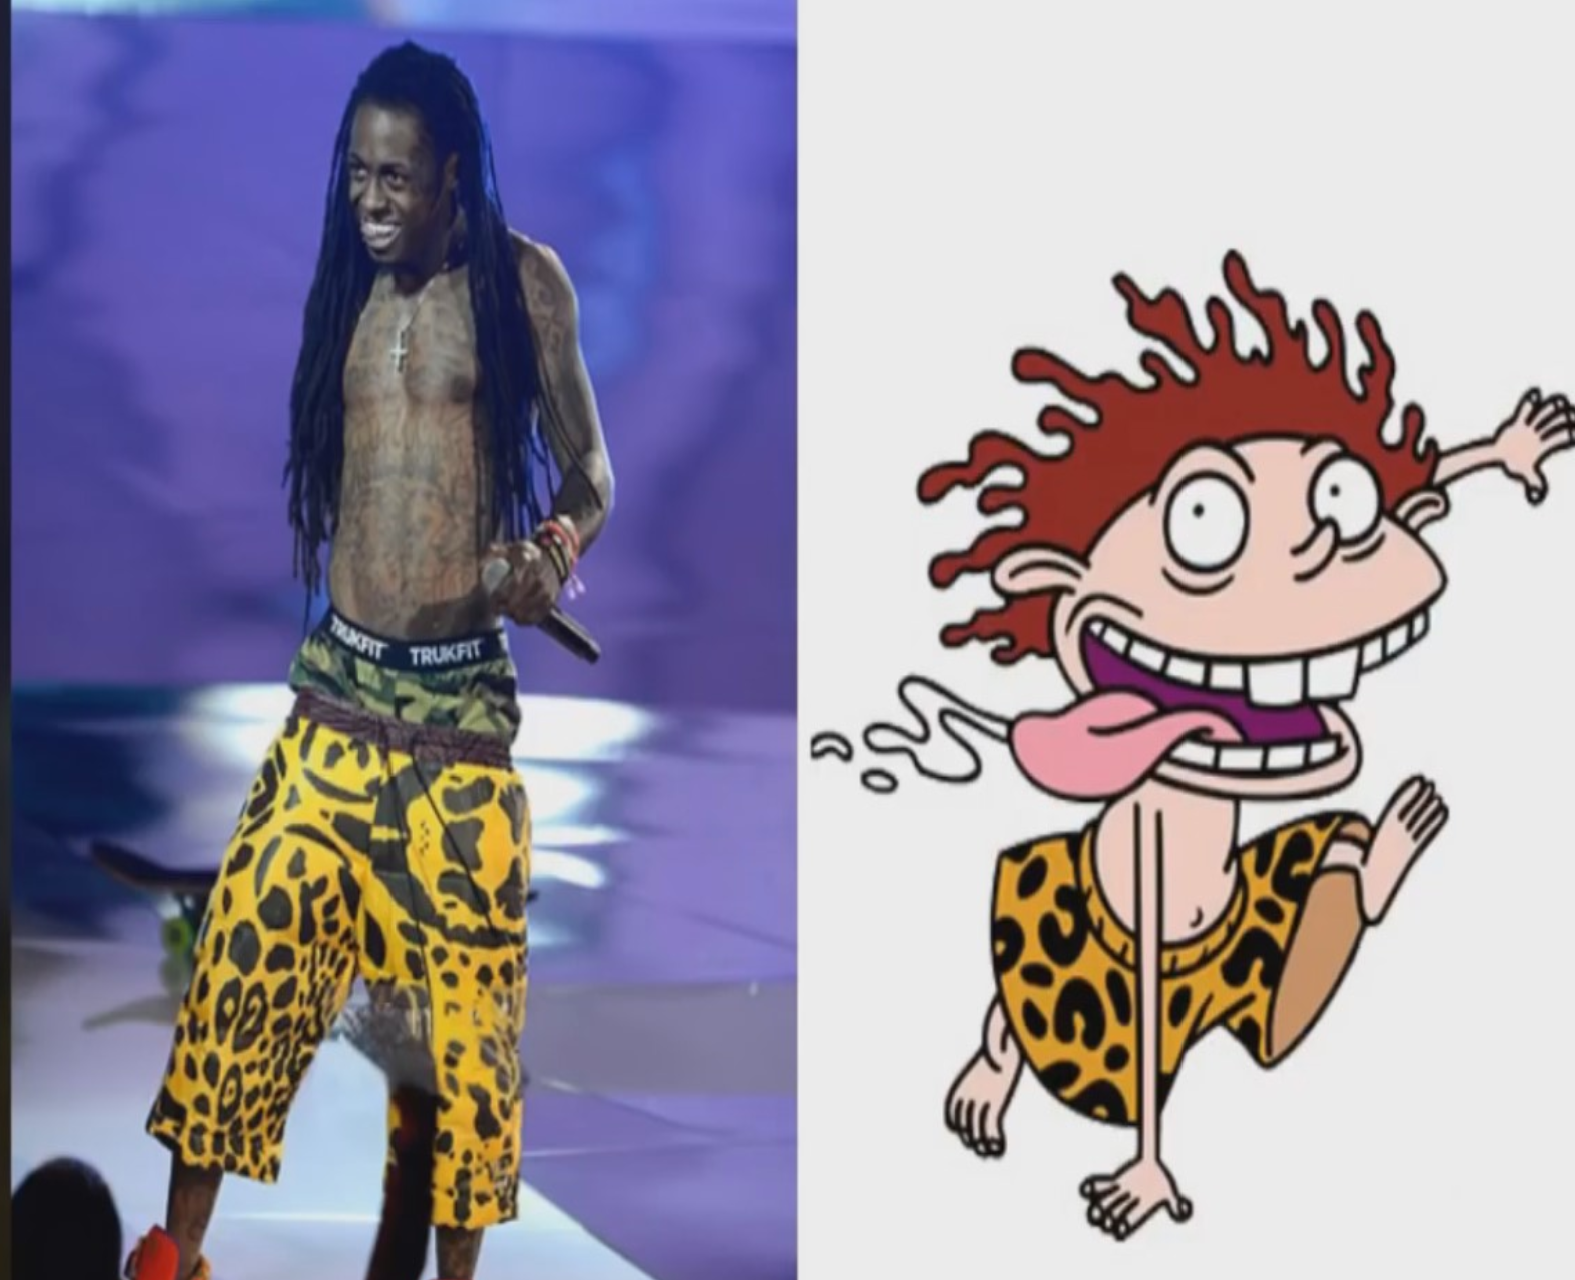 just for laughs - Who Wore It Better part 2